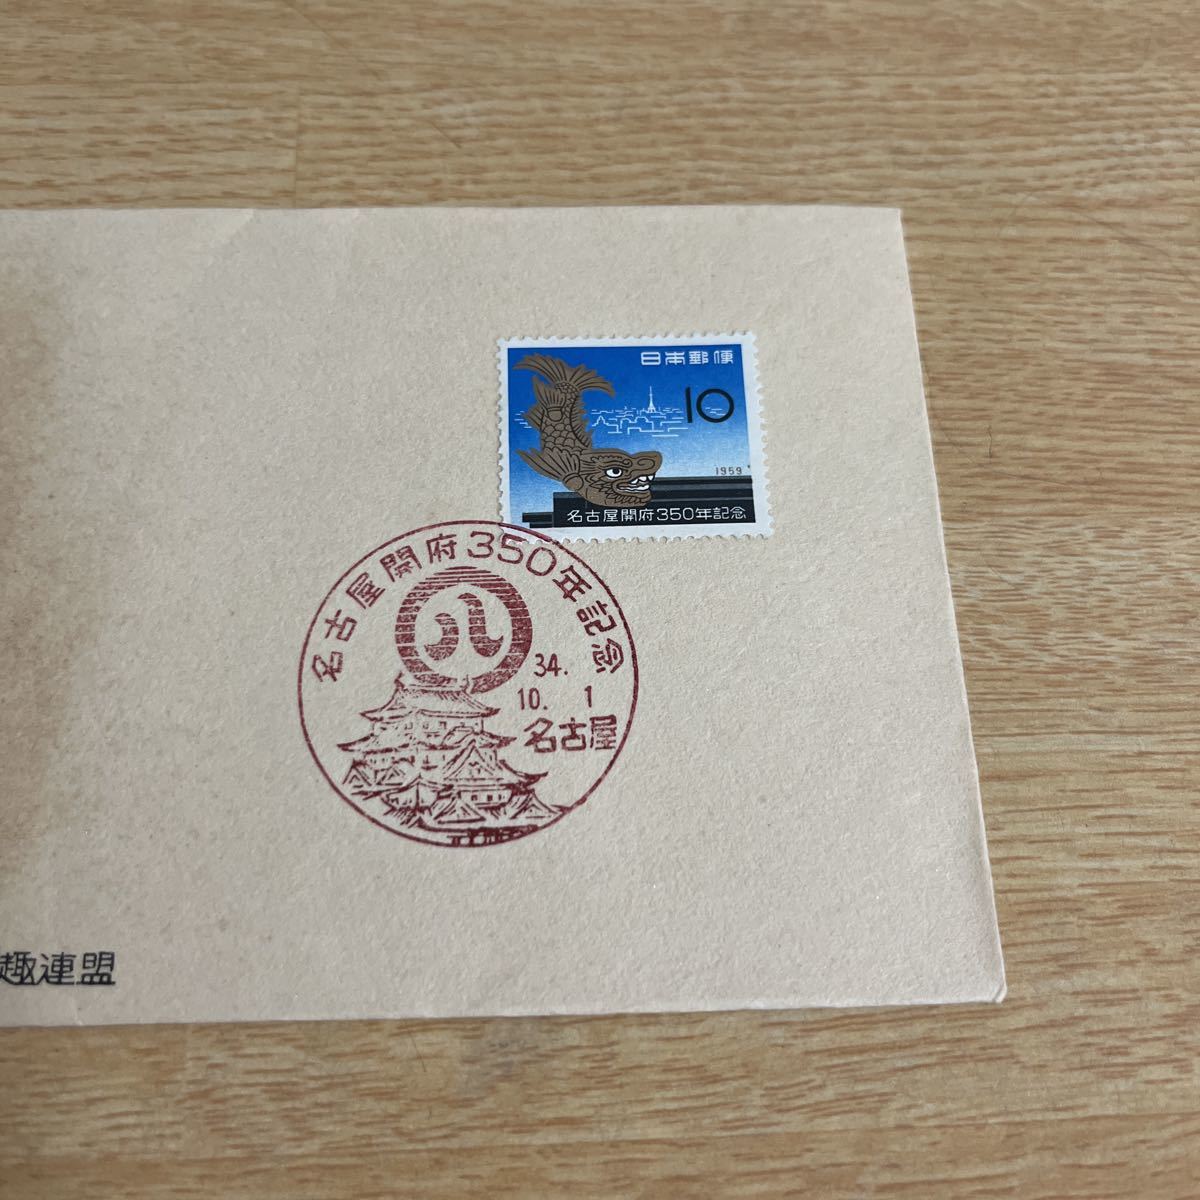 『O1』名古屋開府350年記念切手初日カバー　First day Cover FDC ★送料84円★昭和34年_画像2